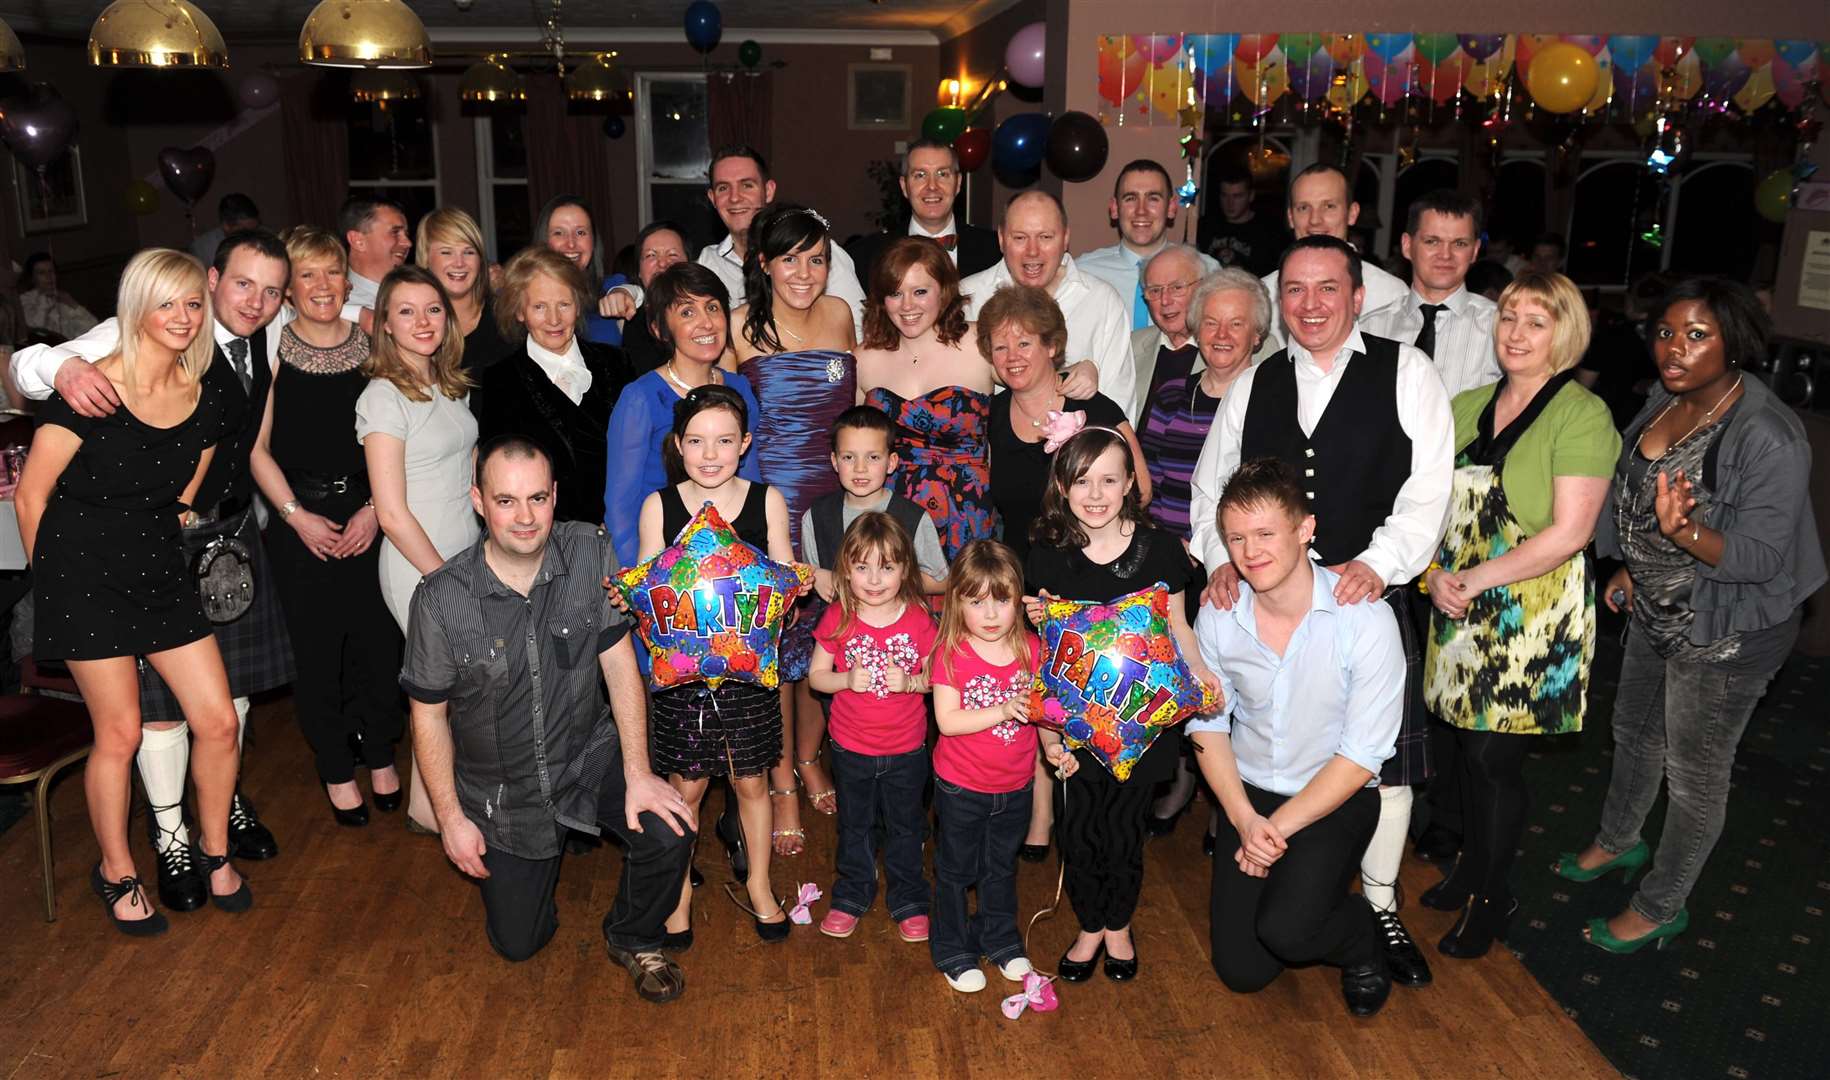 Everyone having fun at a joint birthday party at the Chieftain Hotel Inverness. Picture by Alasdair Allen.